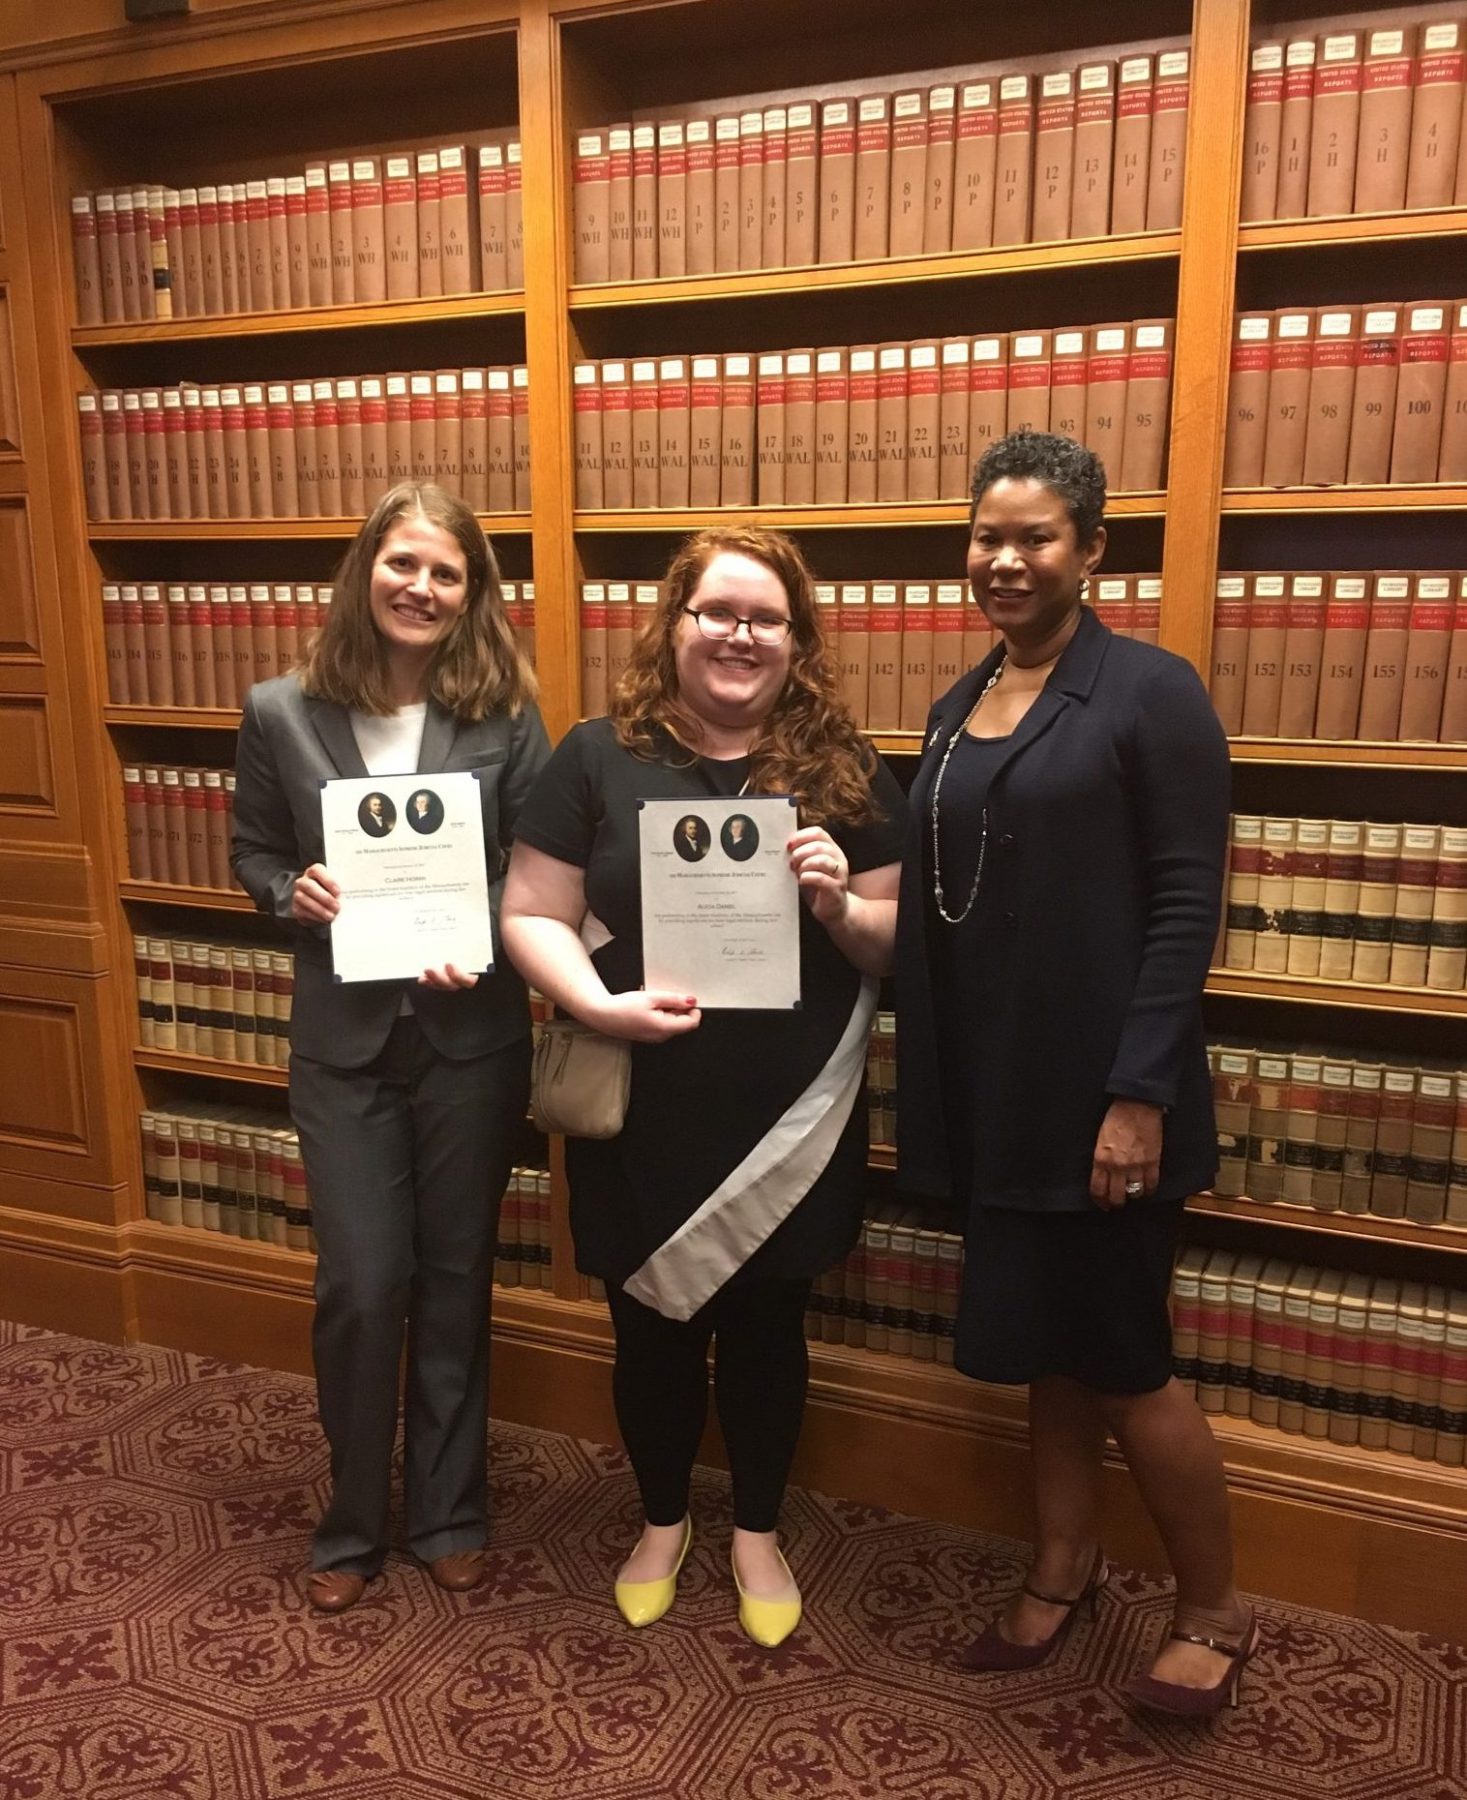 Photo of From left to right - Claire Horan JD 18, Alicia Daniel JD 18, and Justice Kimberly S. Budd standing in front of a book shelf